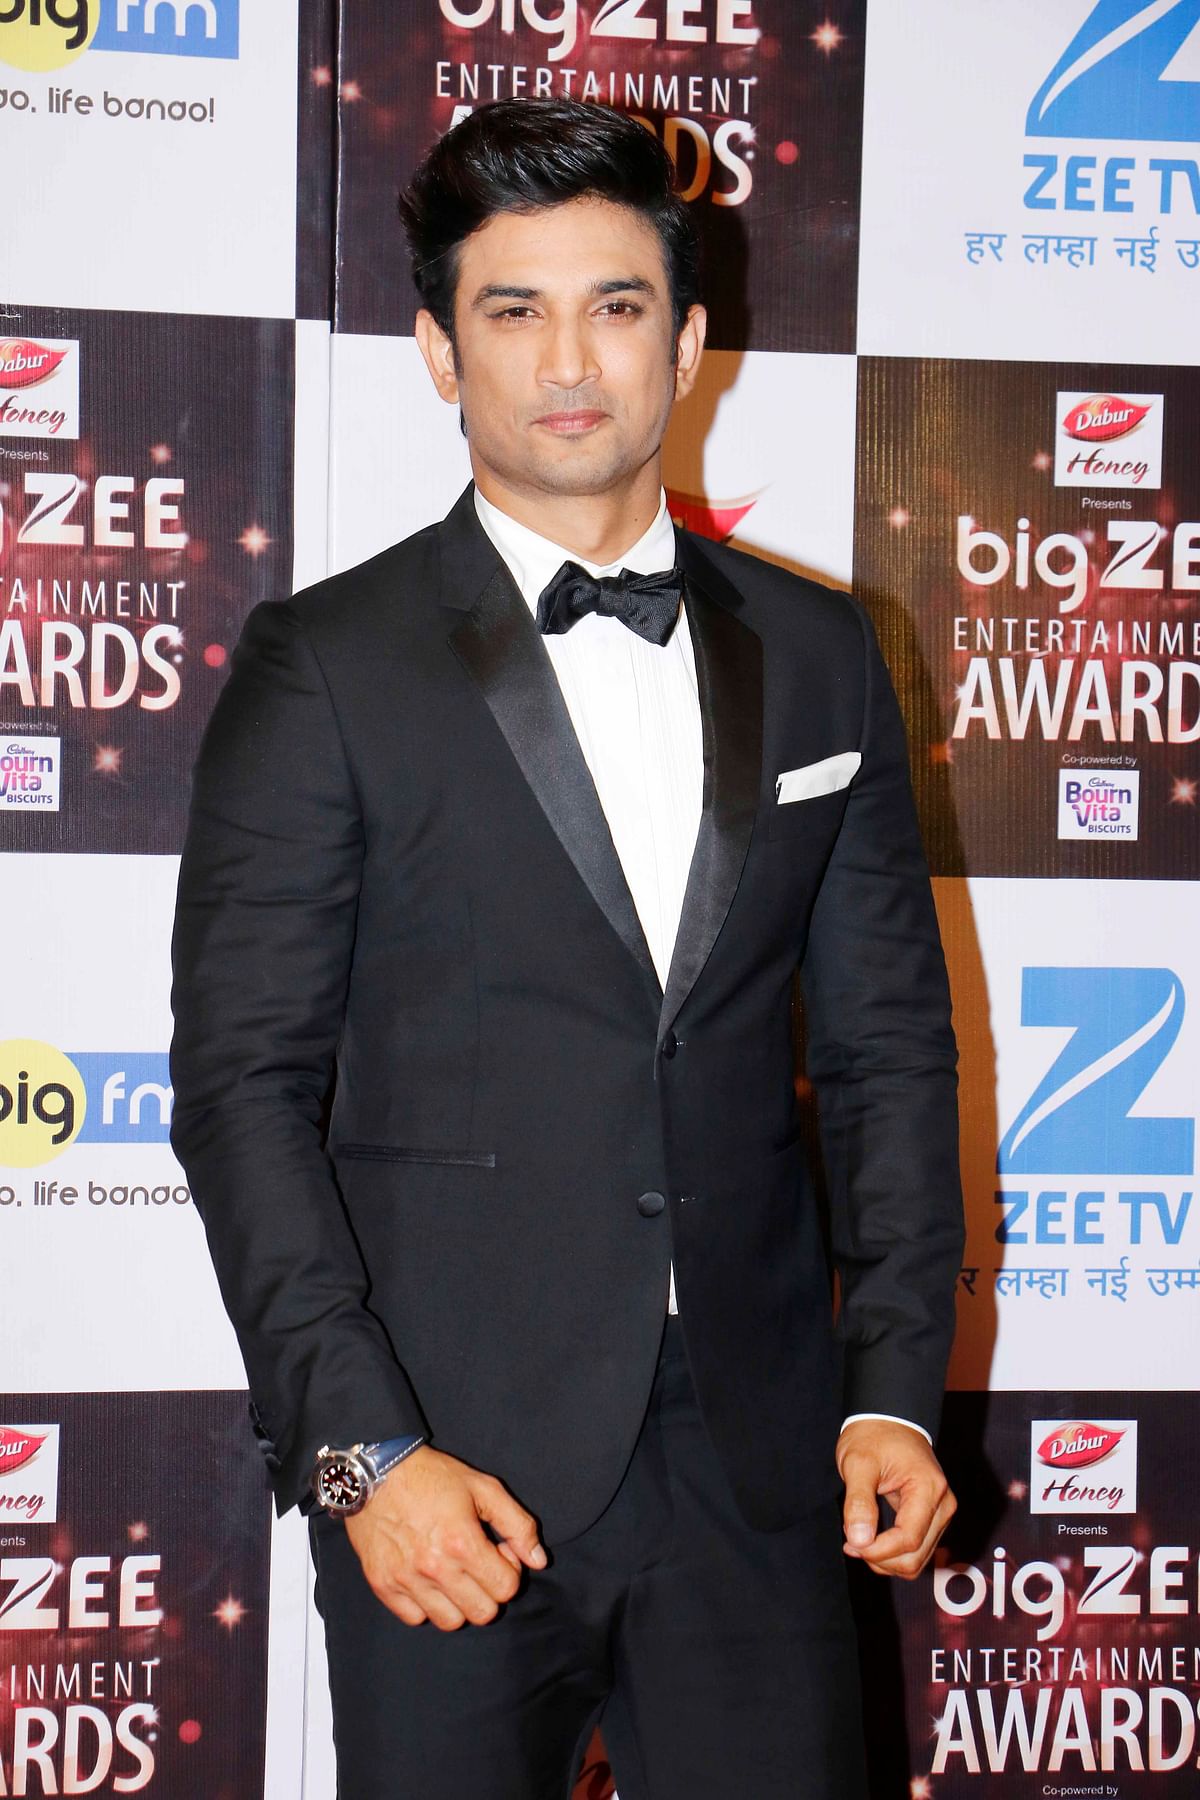 Pics of stars at the Big Zee Entertainment Awards.